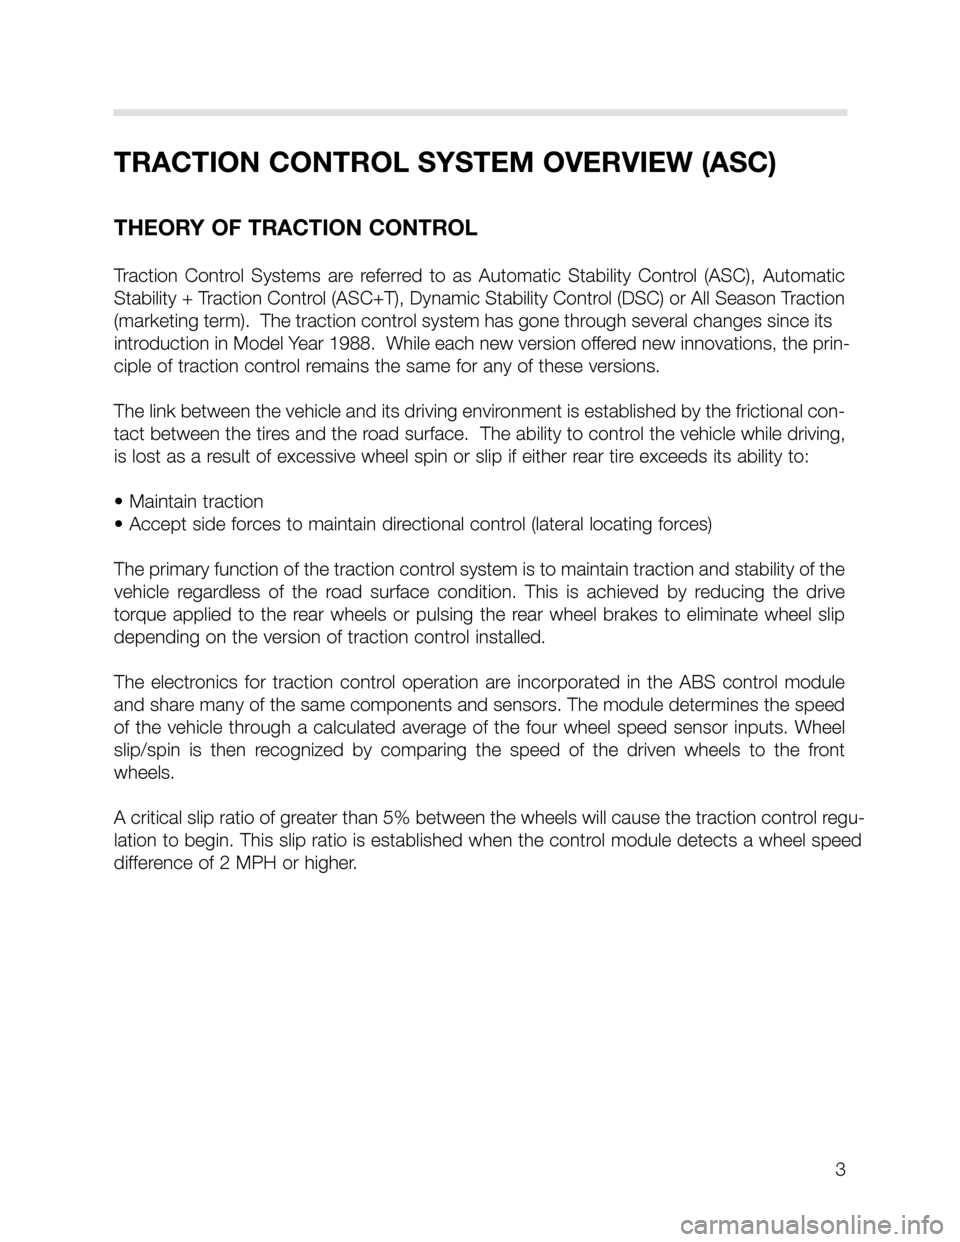 BMW X5 2001 E53 DSC System Workshop Manual 3
TRACTION CONTROL SYSTEM OVERVIEW (ASC)
THEORY OF TRACTION CONTROL
Traction  Control  Systems  are  referred  to  as  Automatic  Stability  Control  (ASC),  Automatic
Stability + Traction Control (AS